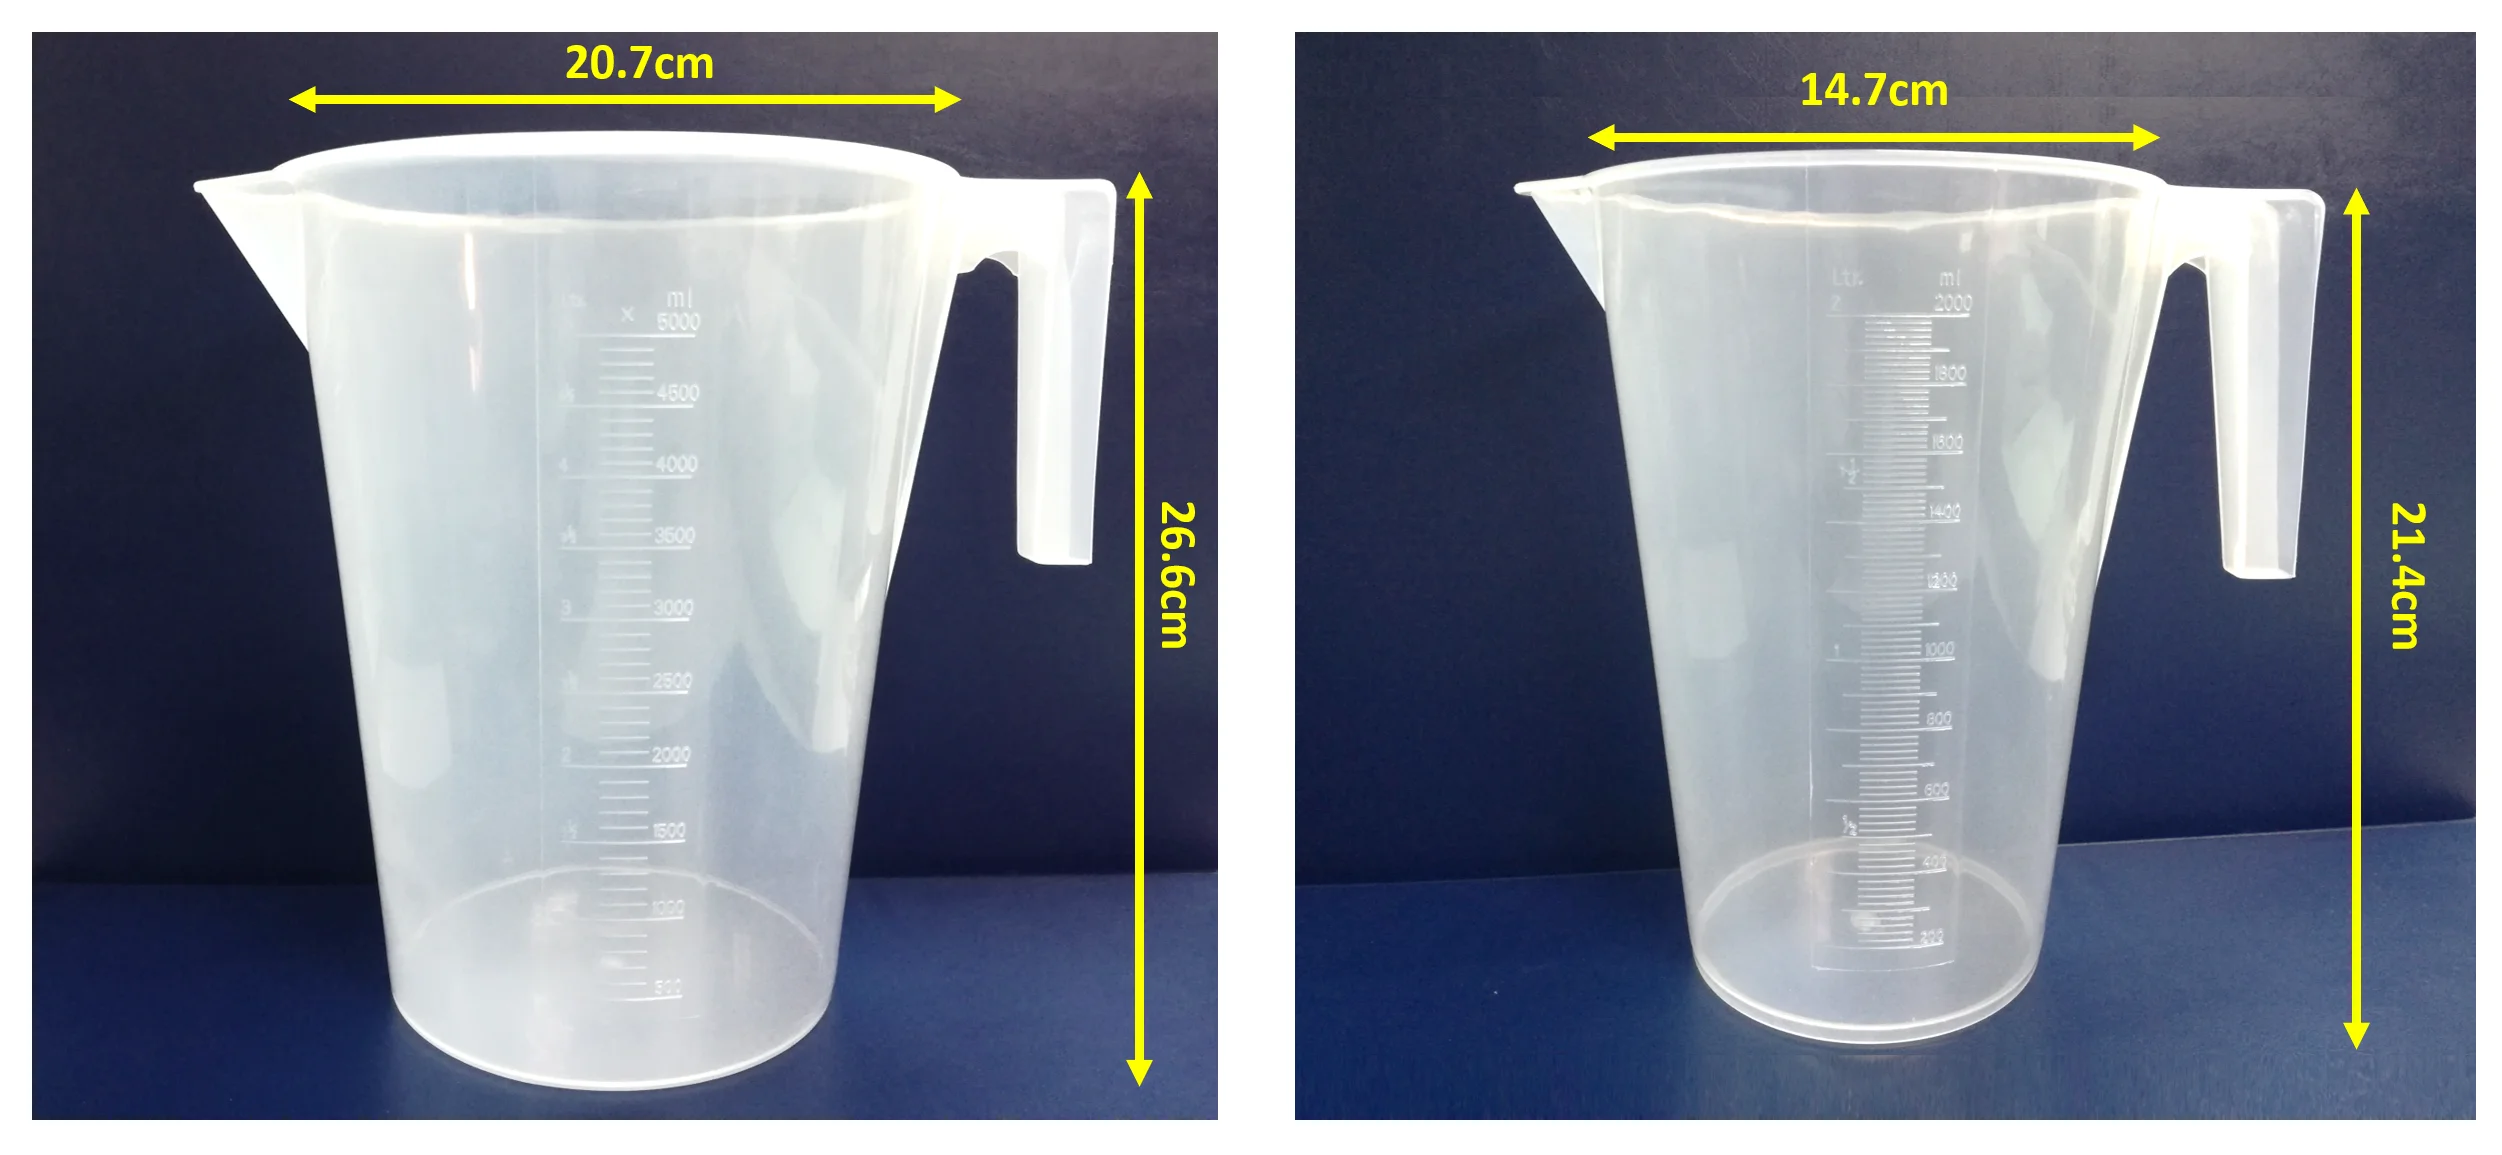 5000 ml Polypropylene Plastic Transparency Measuring Jug Container  with Graduated Digital Scale